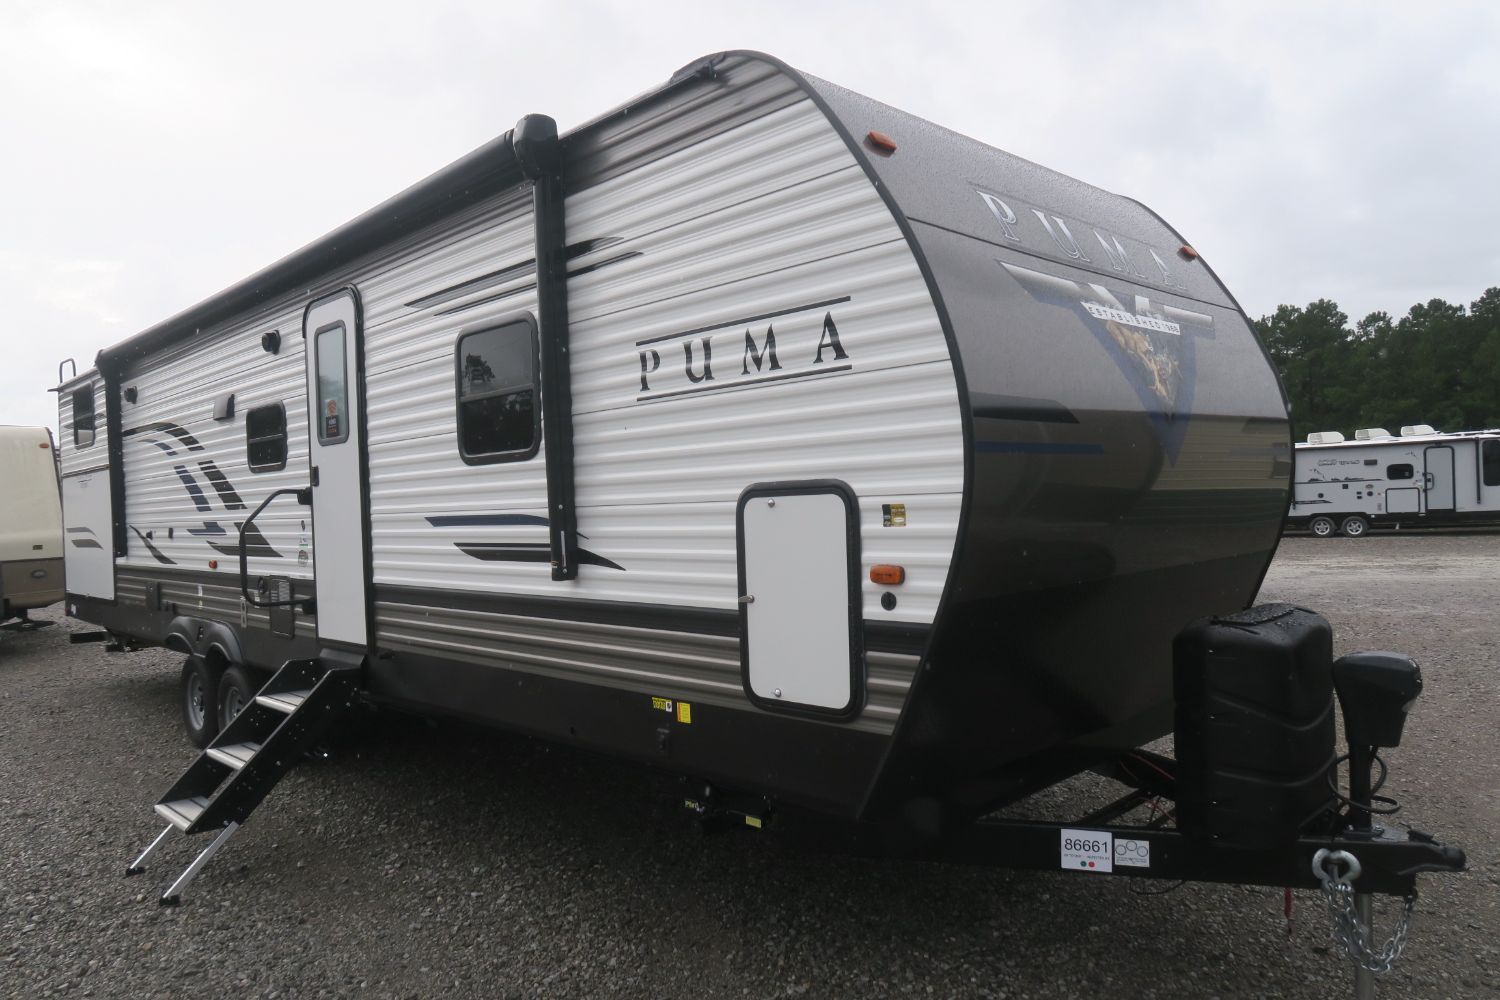 NEW 2021 PUMA 32RBFQ - Overview | Berryland Campers 2021 Travel Trailer With Washer And Dryer